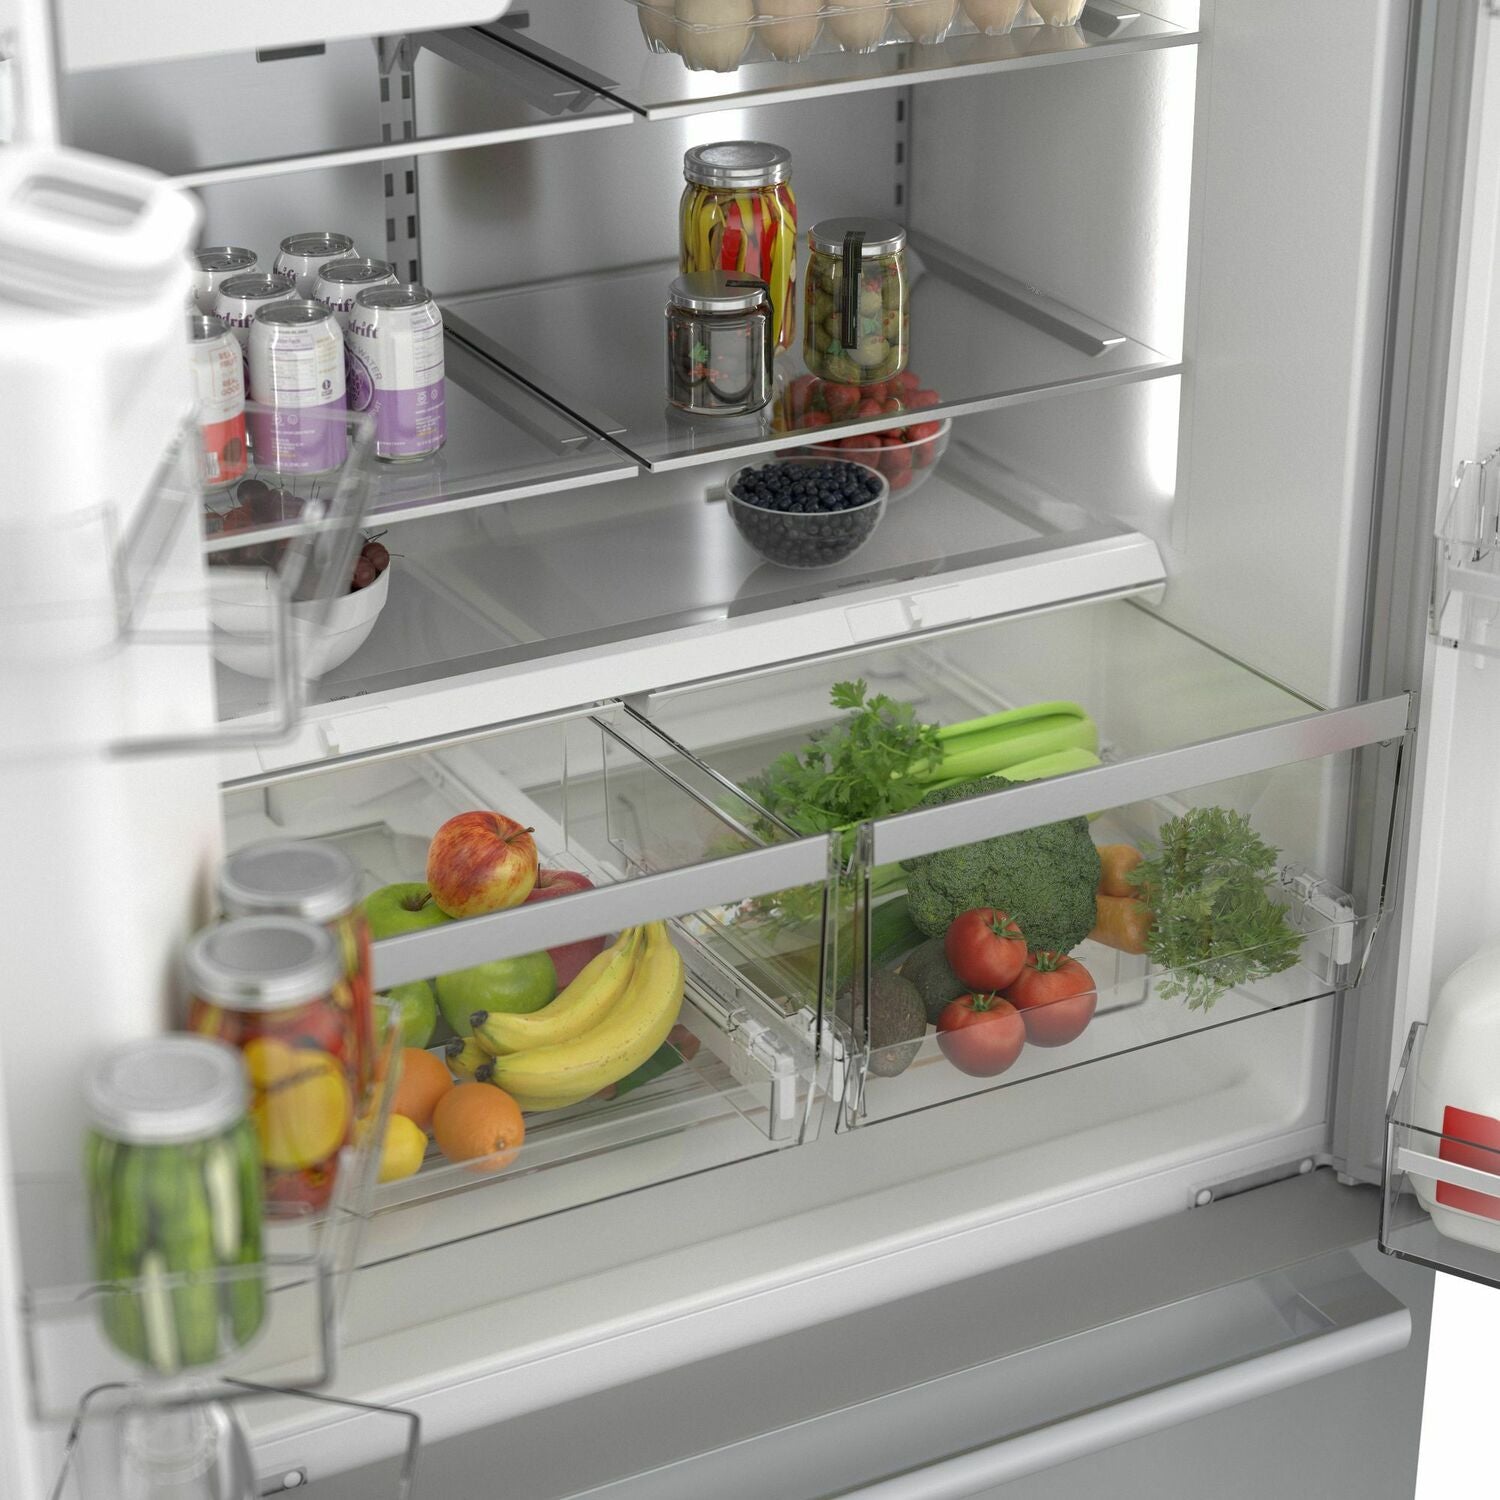 Bosch B36CD50SNS 500 Series French Door Bottom Mount Refrigerator 36'' Easy Clean Stainless Steel B36Cd50Sns